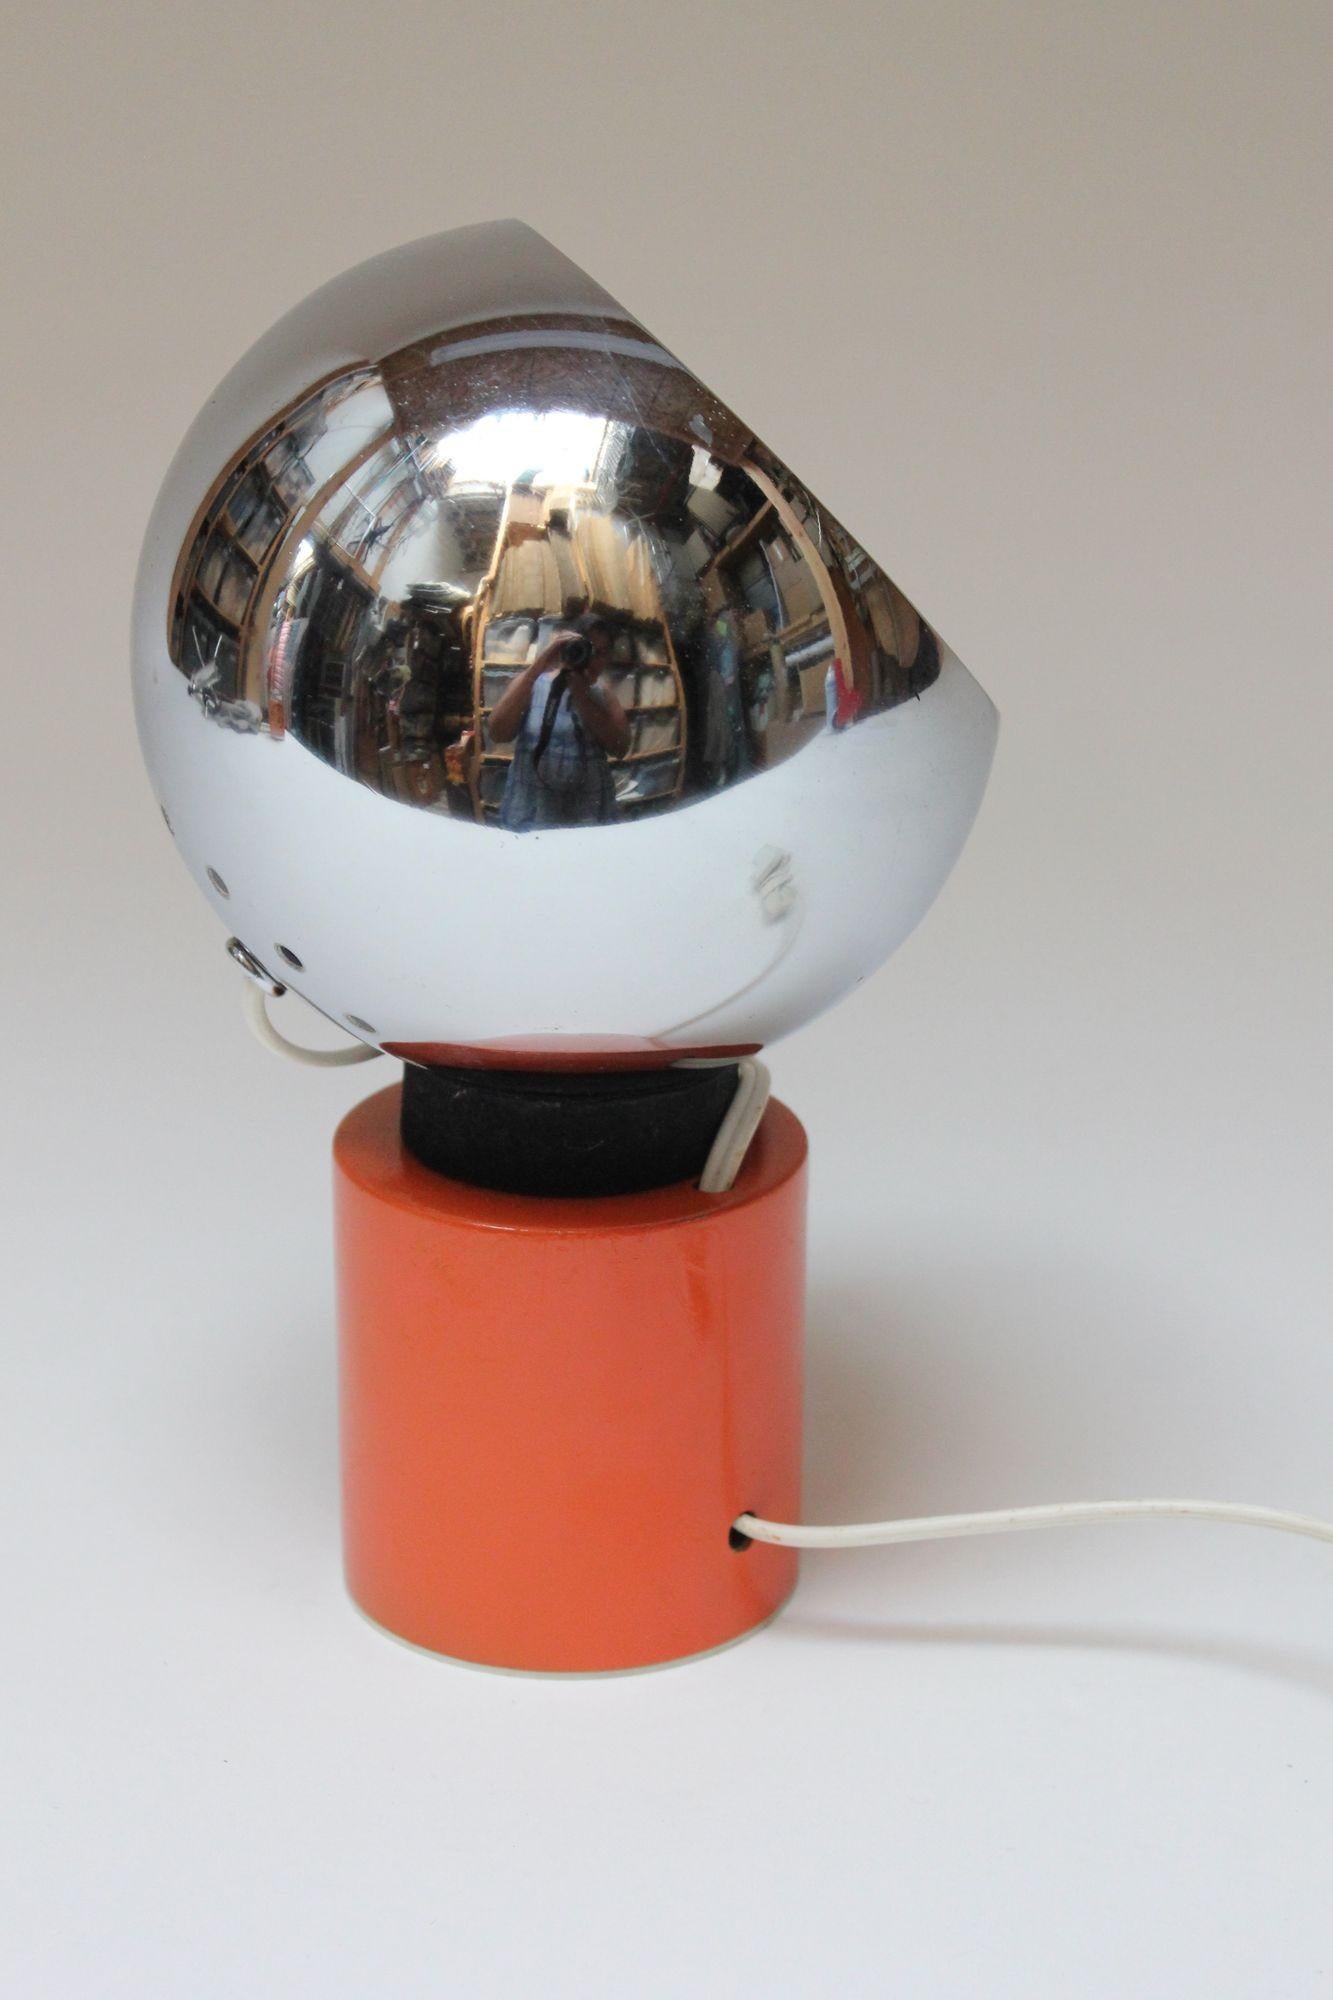 Petite desk/table lamp designed by Luigi Argenta for Reggiani (ca. 1970s, Italy). Composed of a chrome 'eye-ball' fixture supported by a magnetic black and orange base. The magnetic function allows the fixture to maintain its stability after the